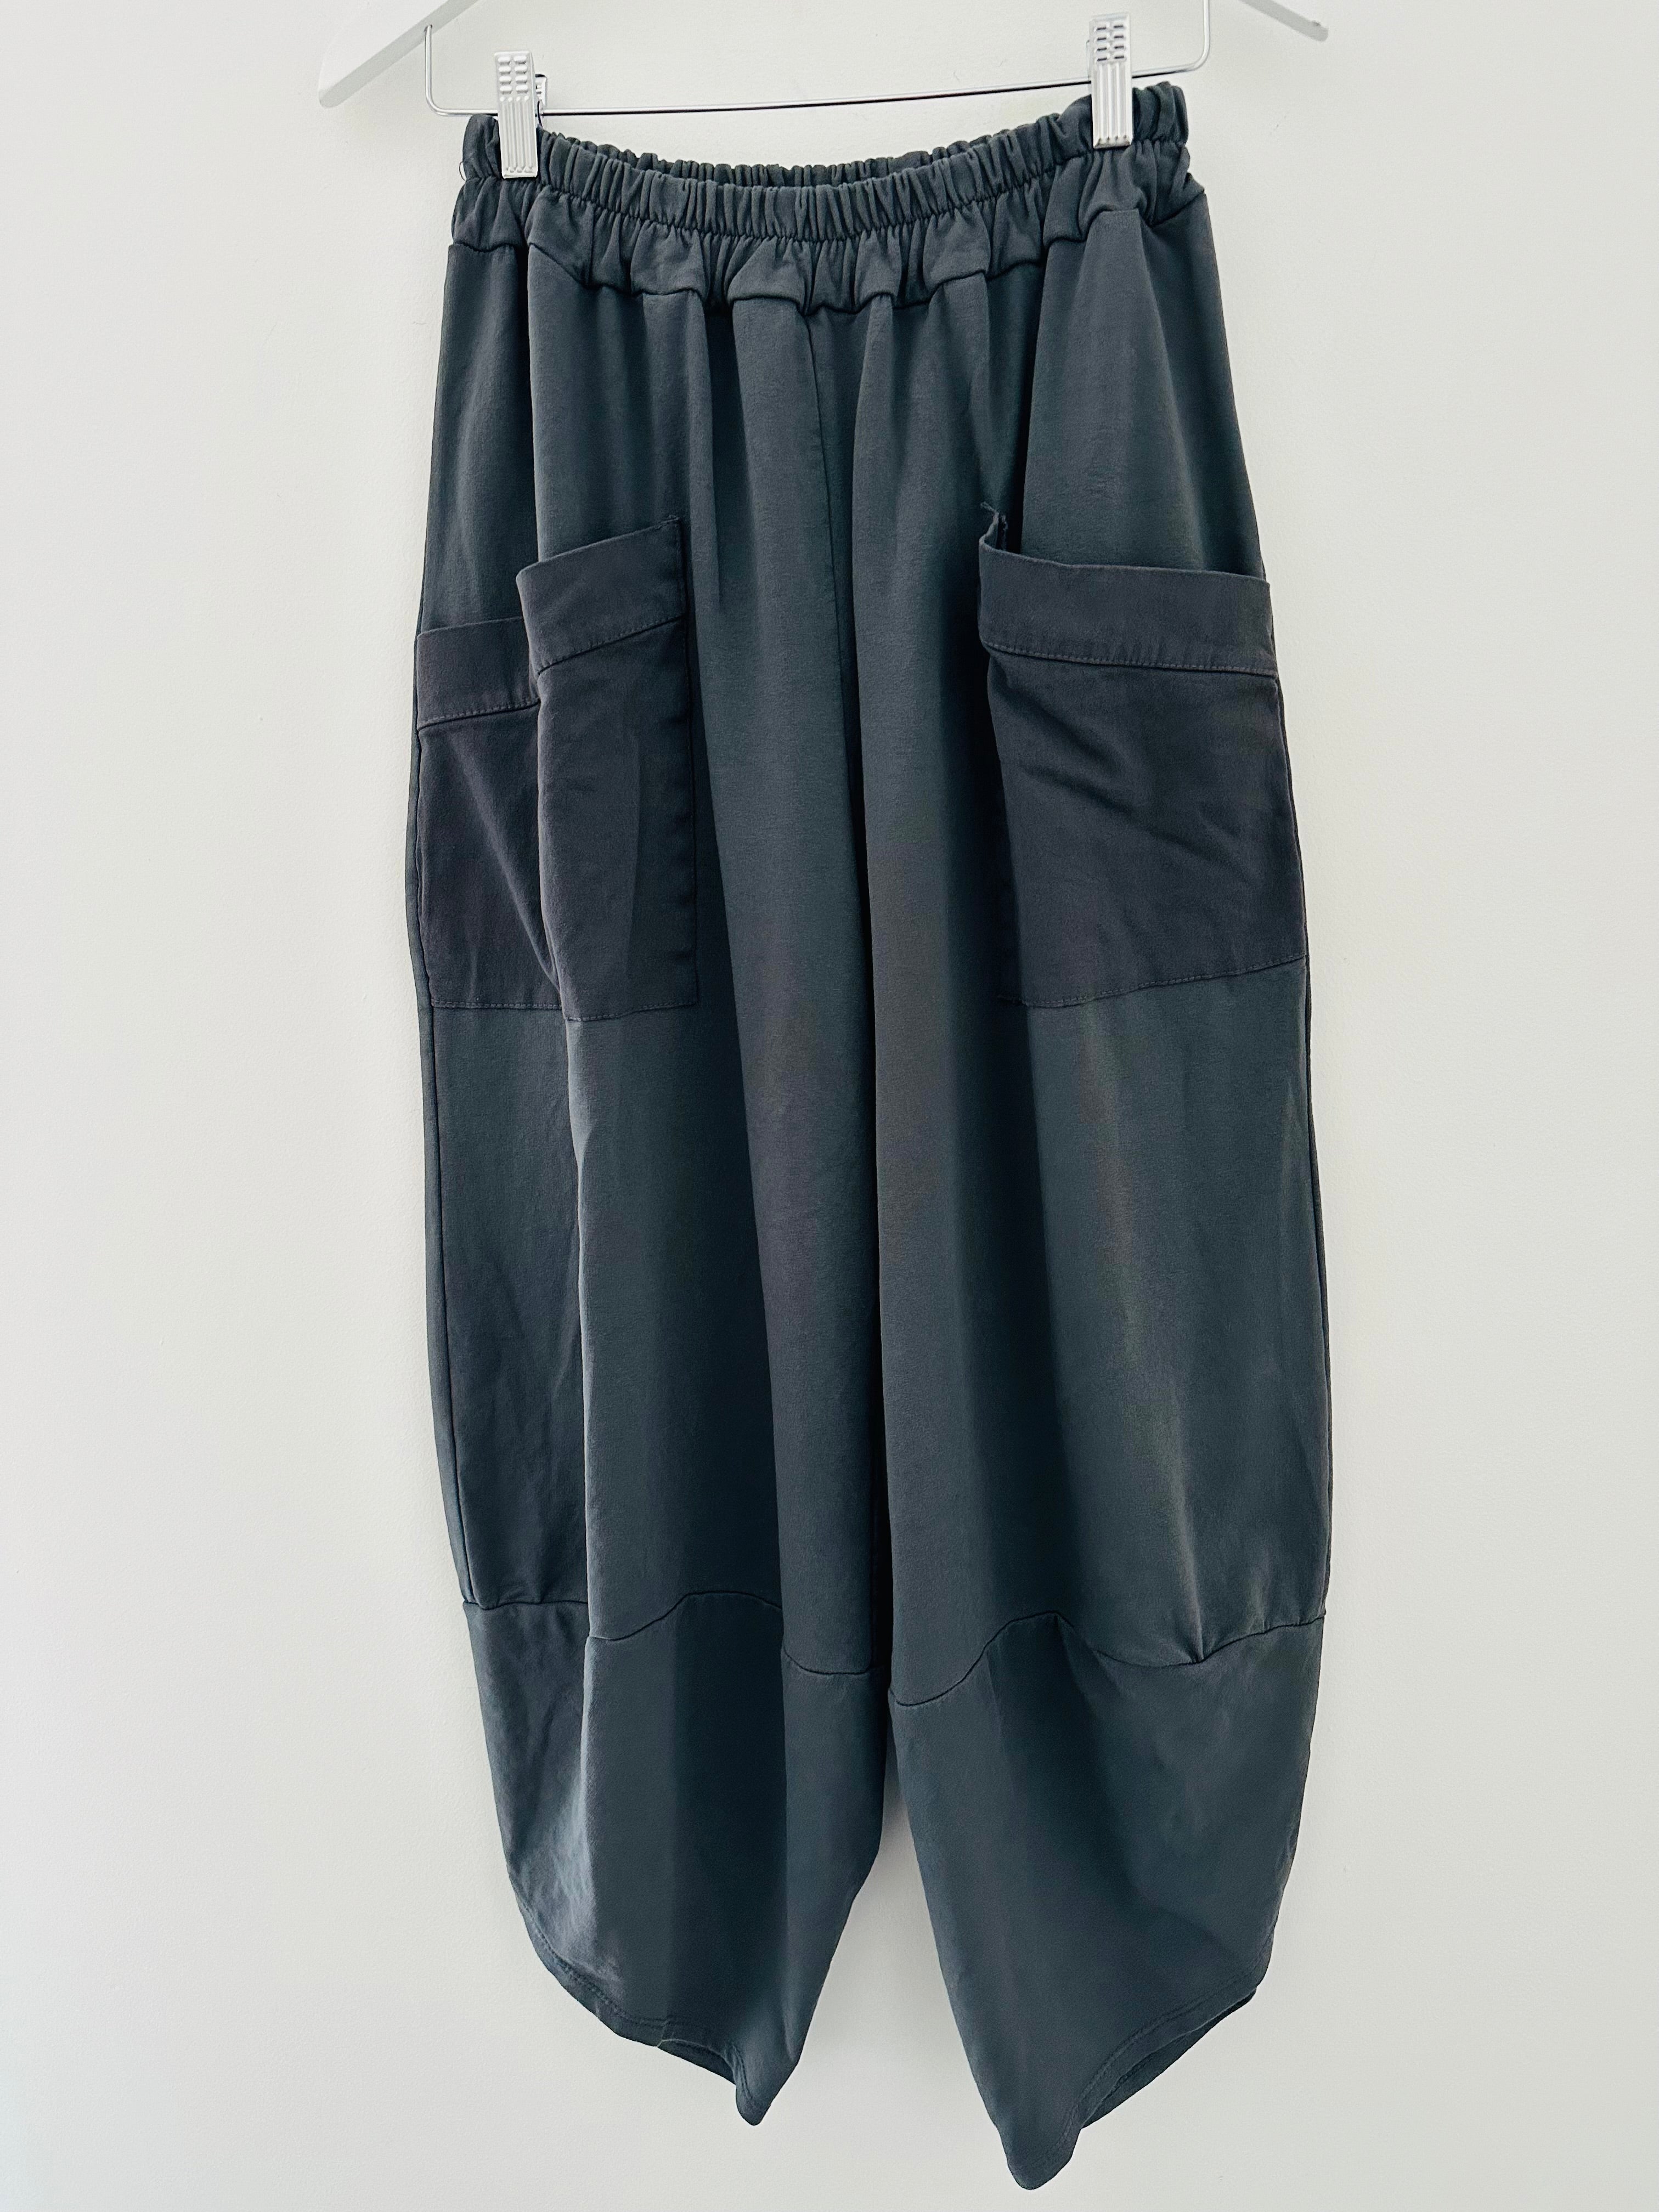 Barrel Shape Cotton Jersey Trousers in Charcoal